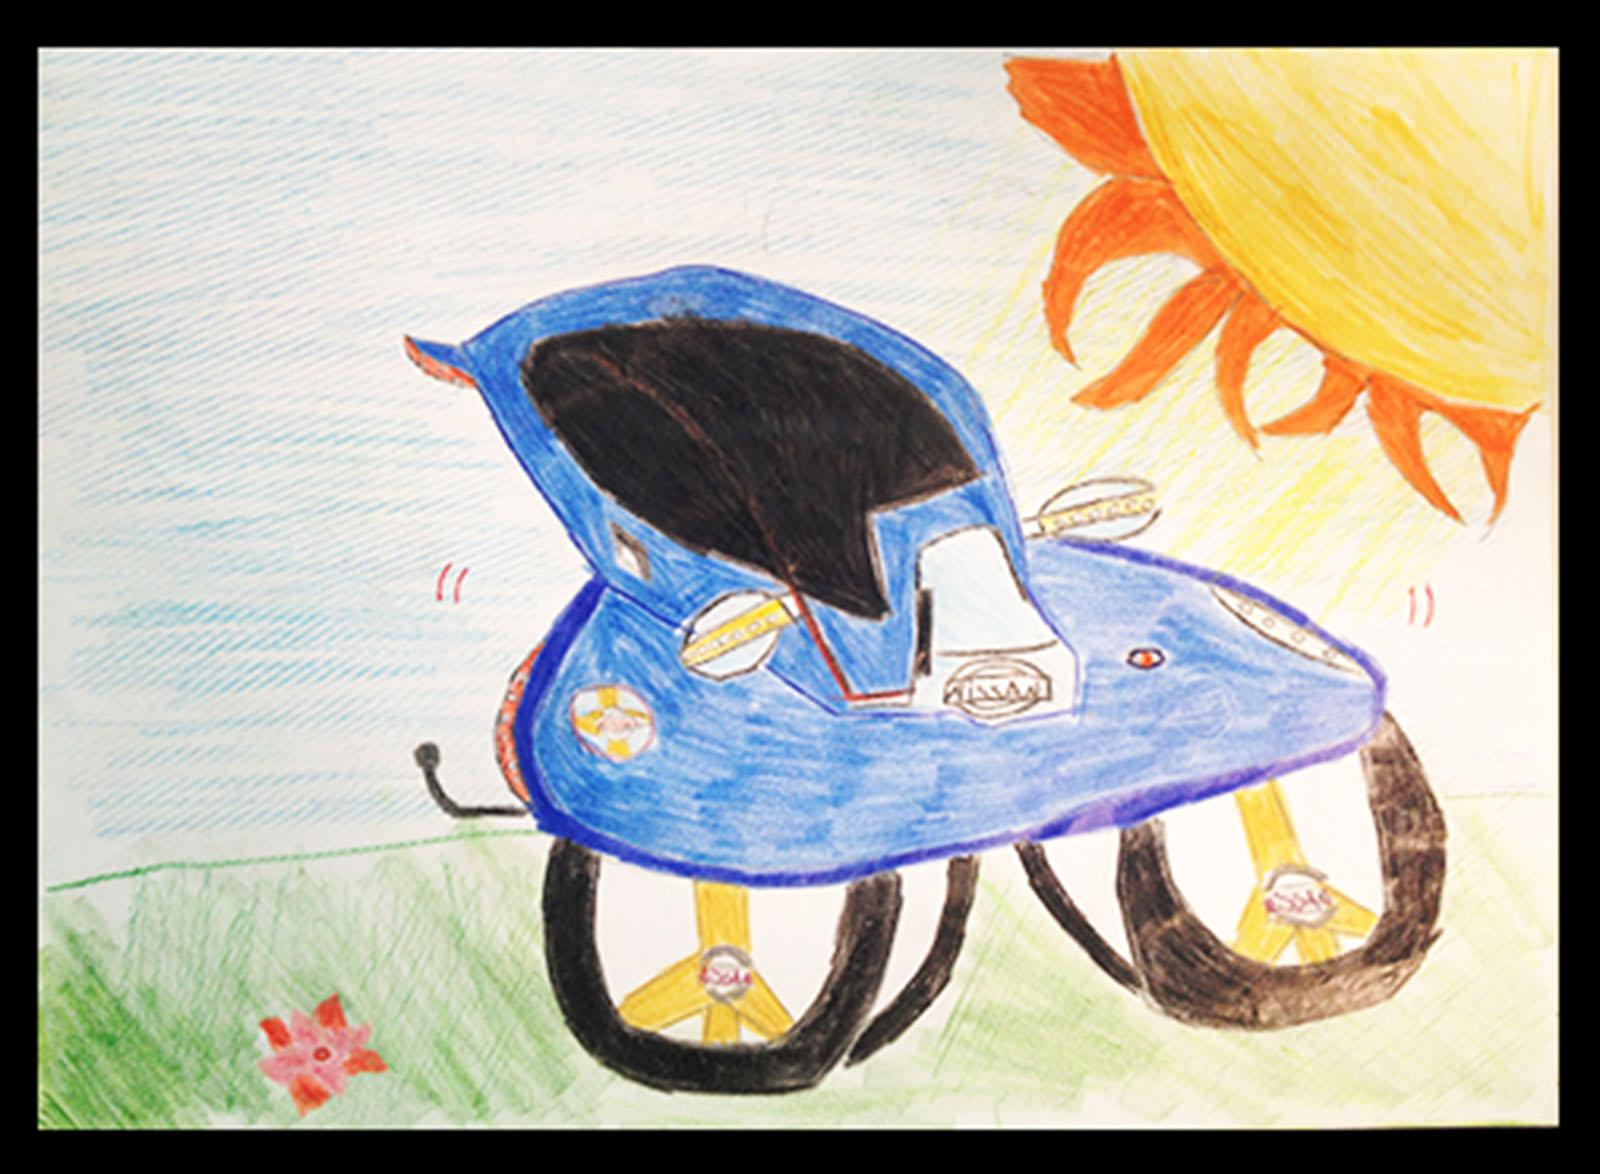 Nissan Concept Cars Made from Kids Drawings are Awesome